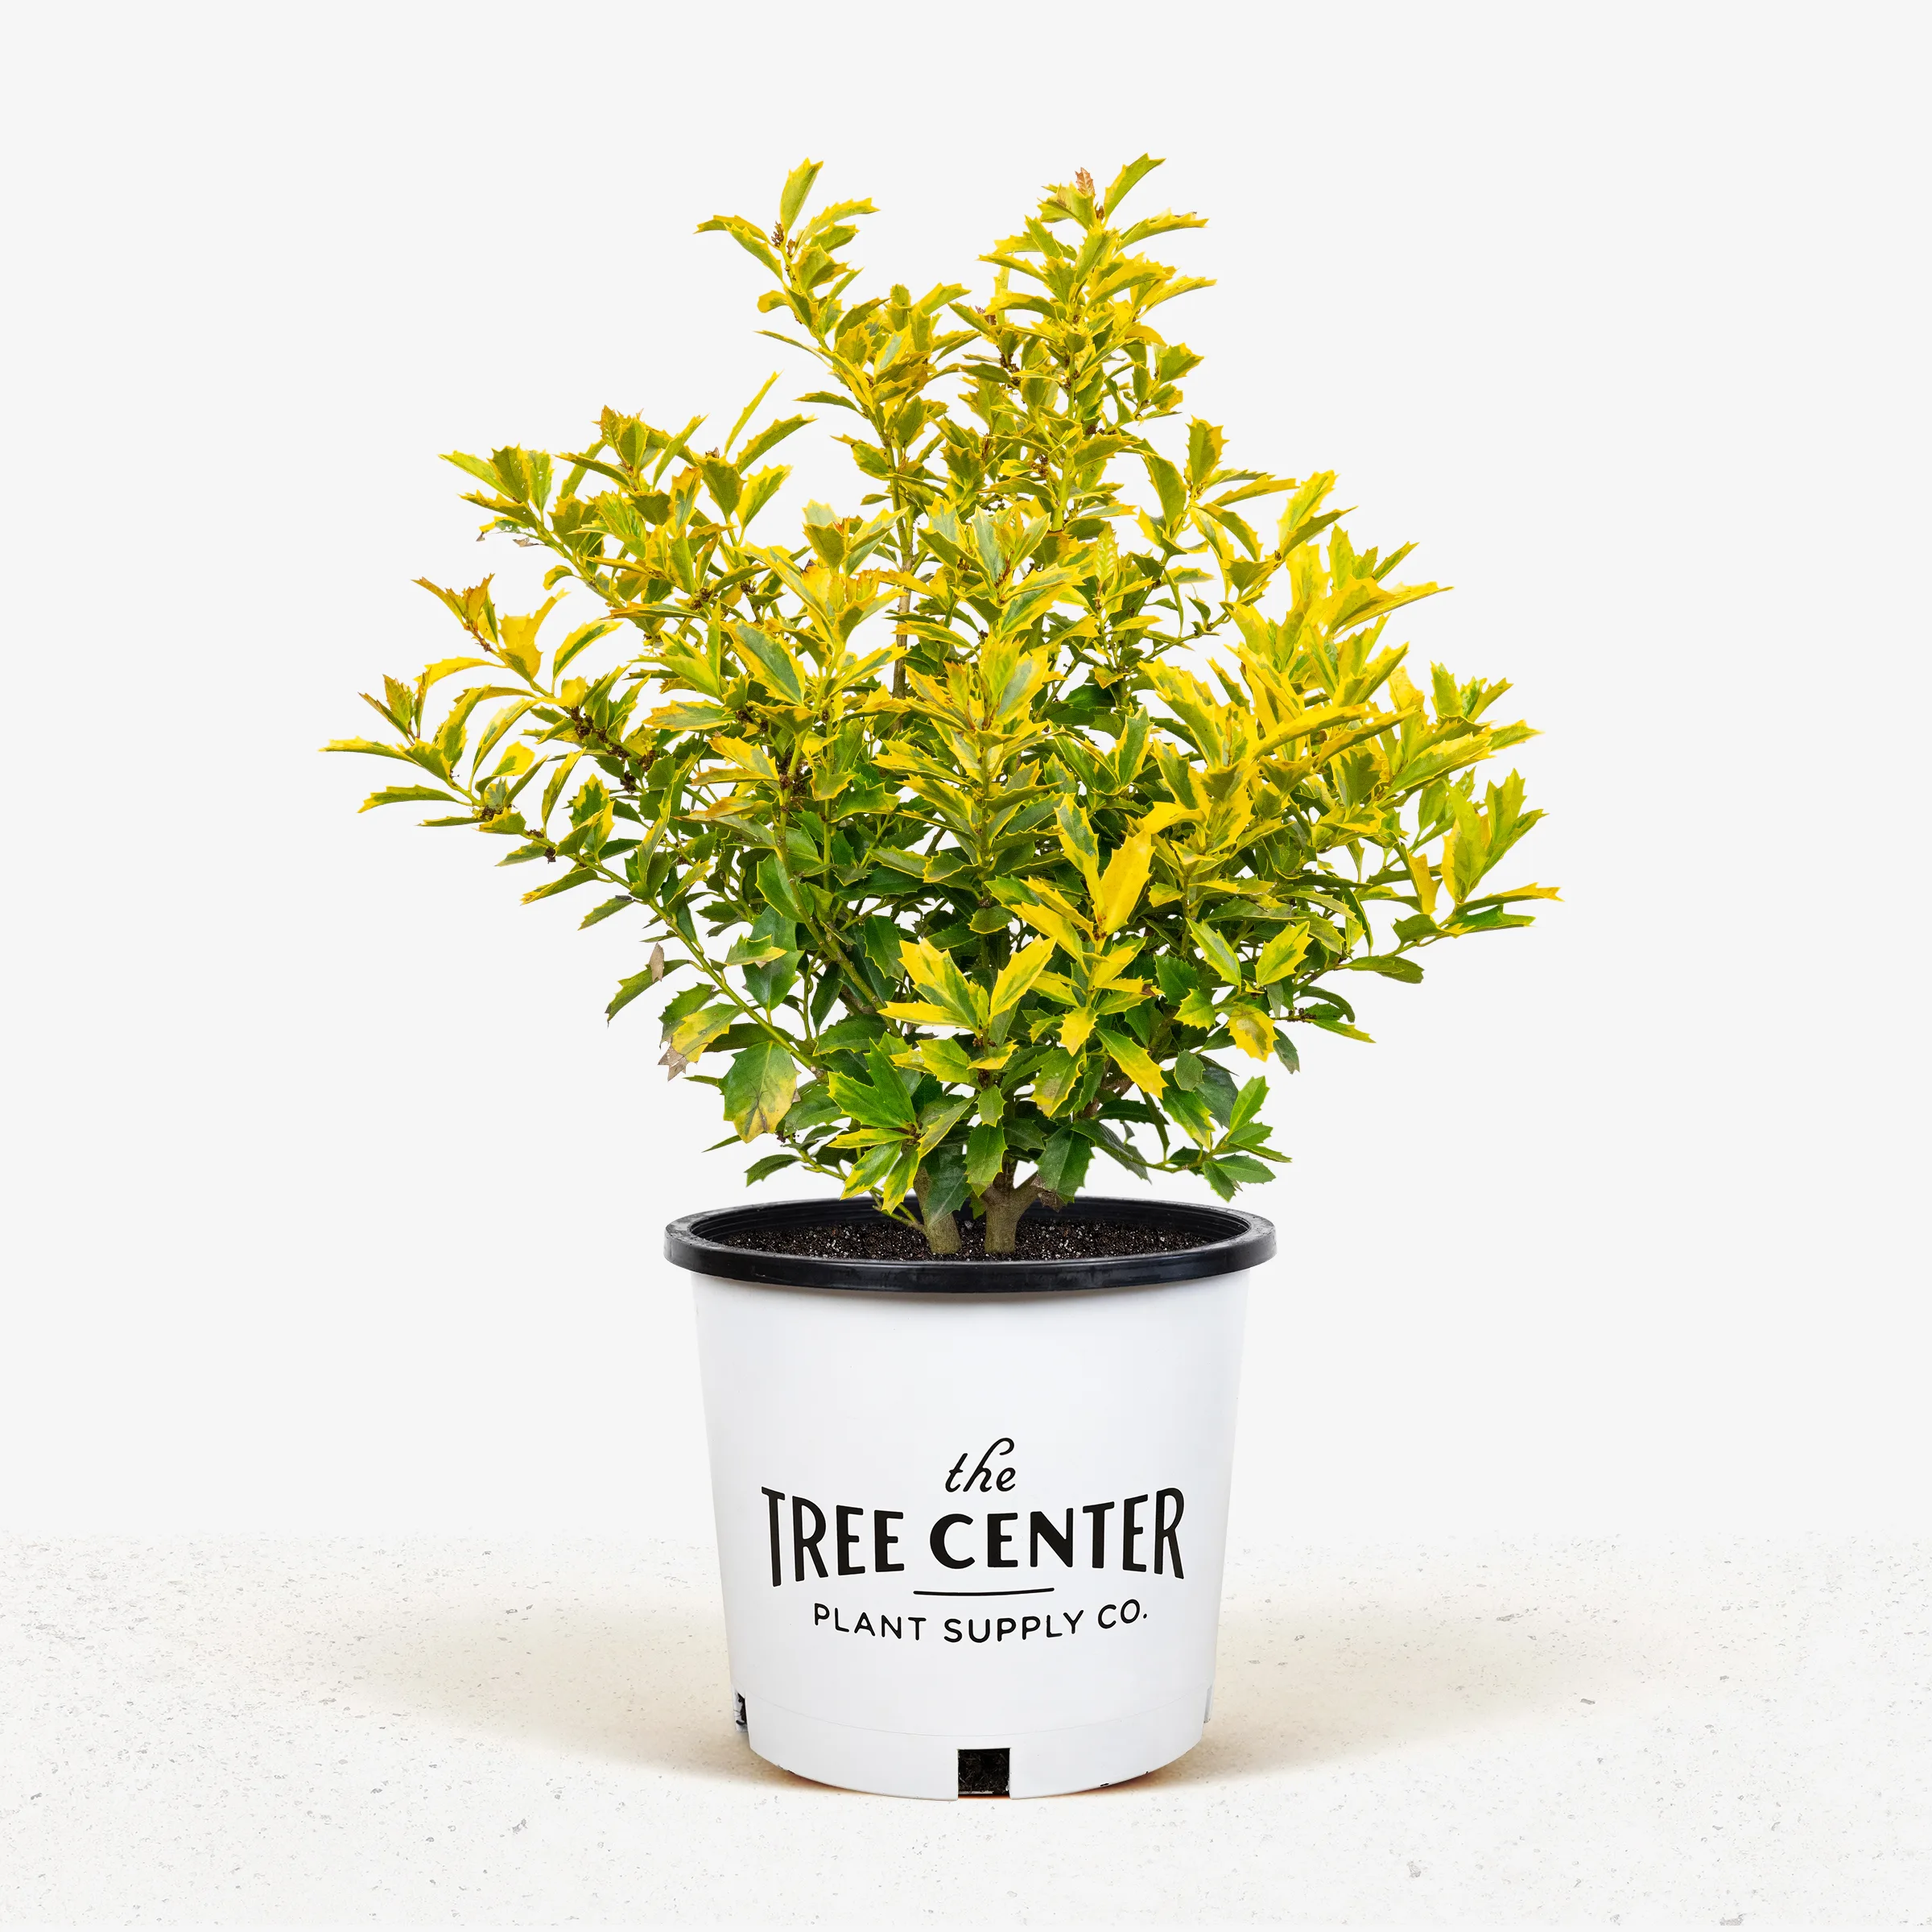 Golden Oakland® Holly For Sale Online The Tree Center